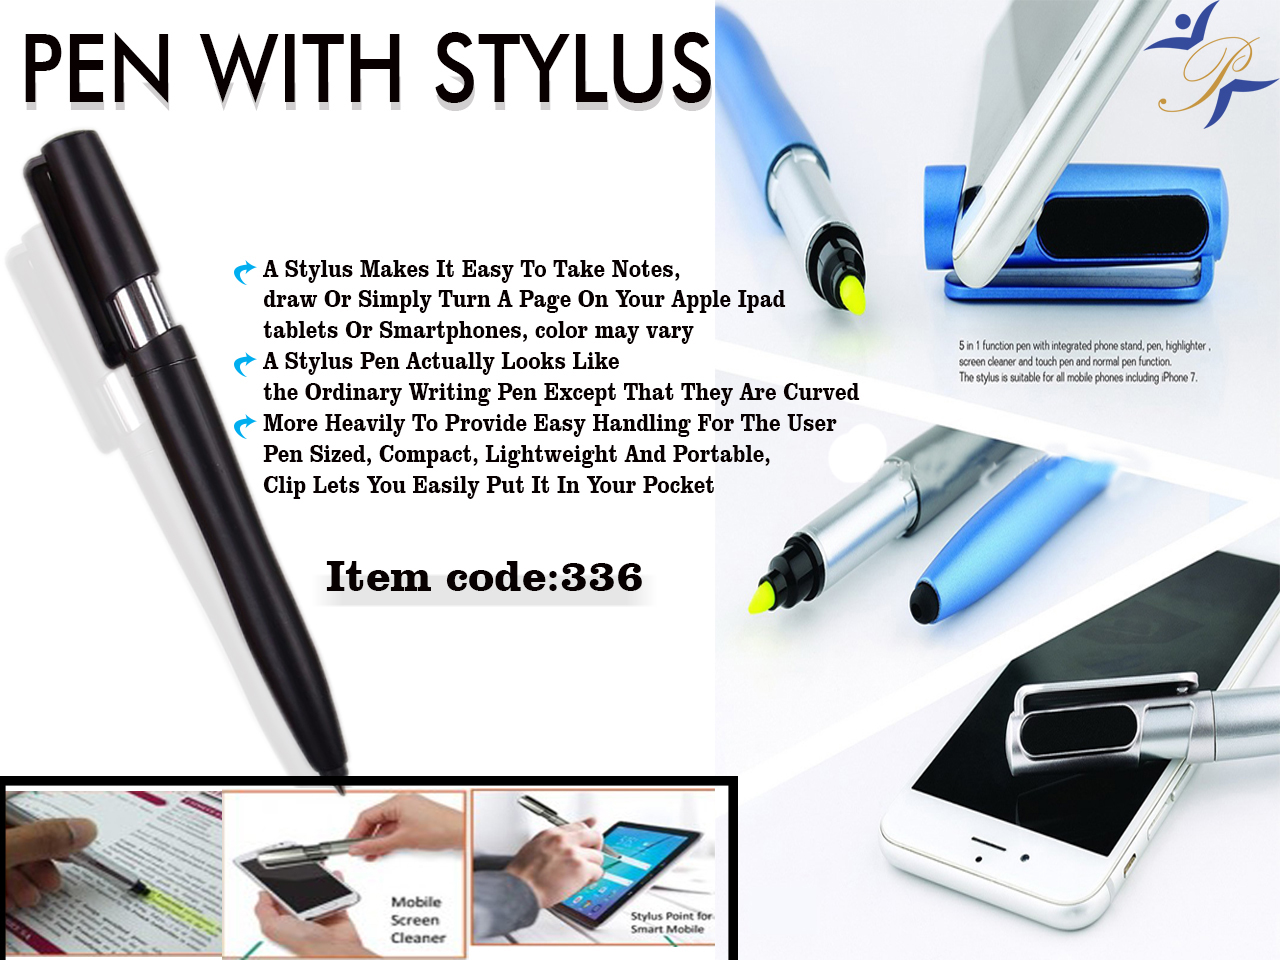 stylus pen with higlighter